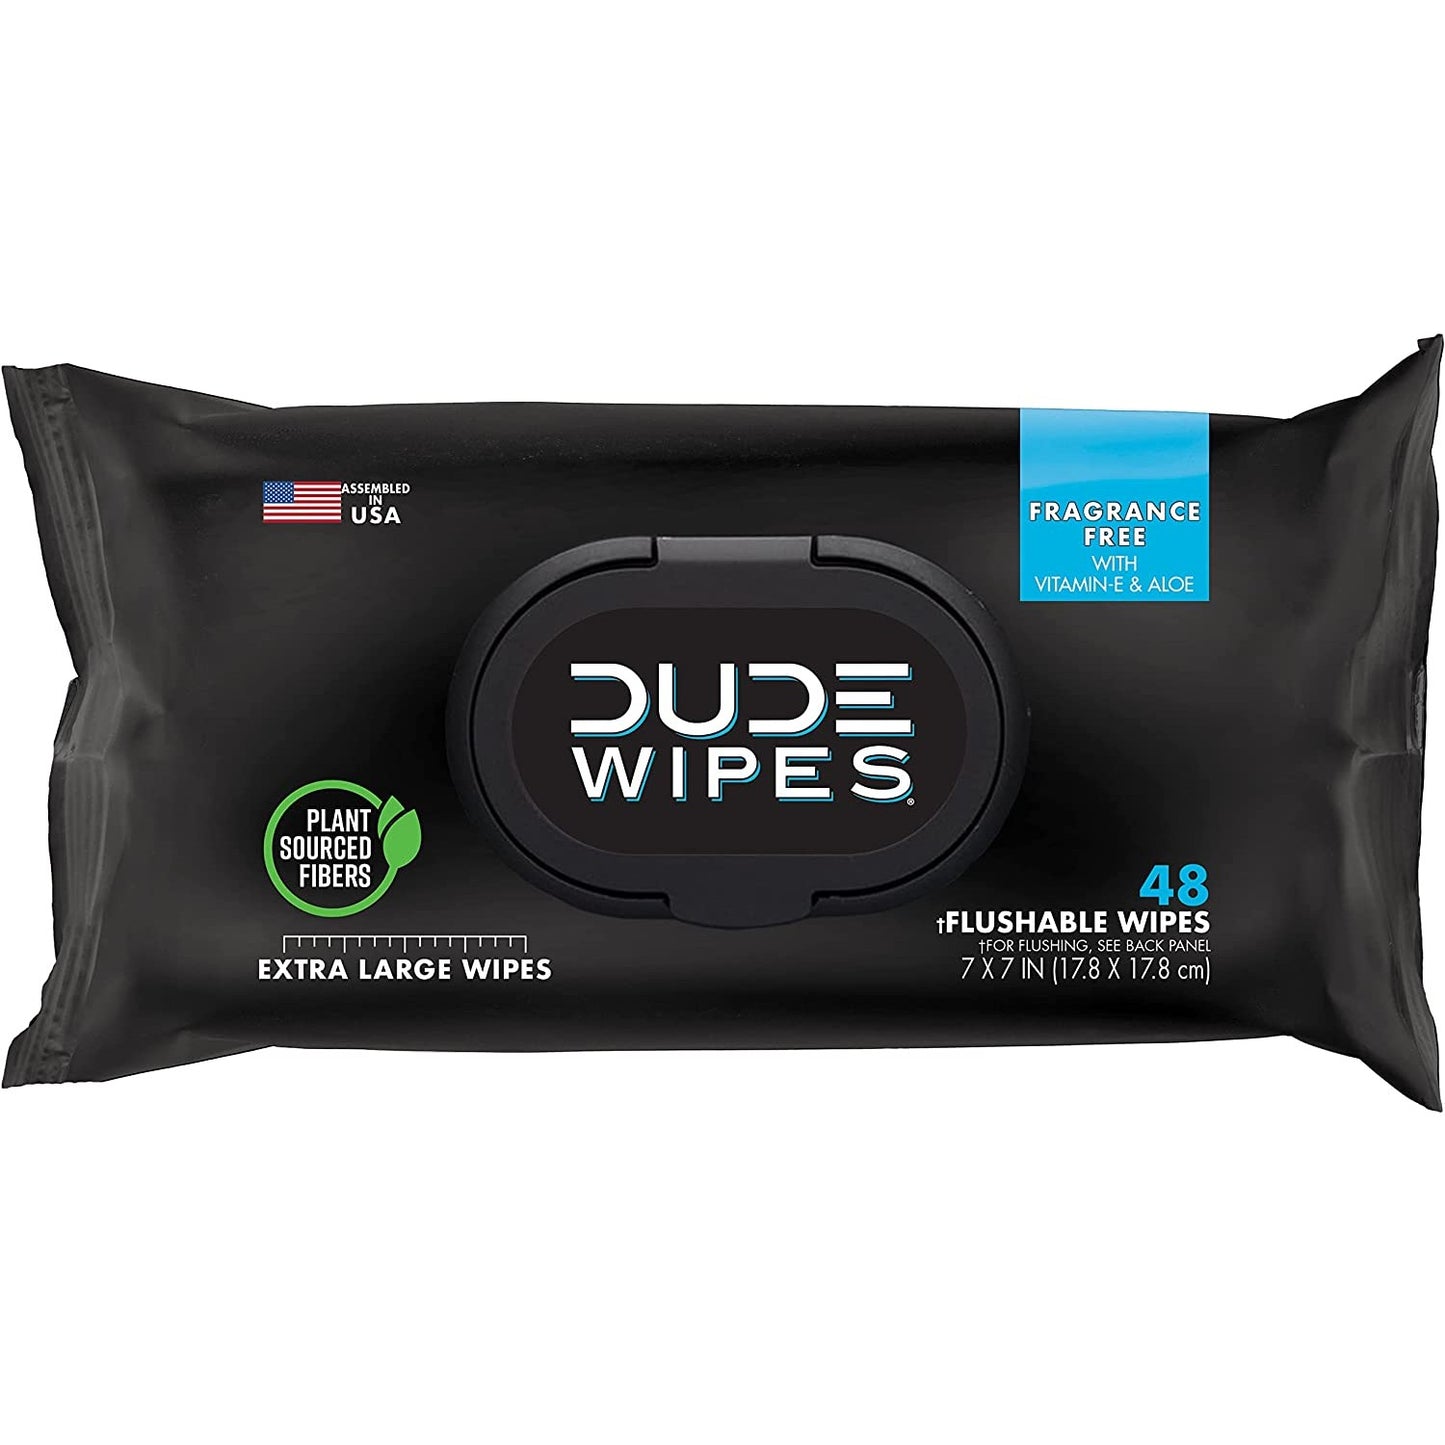 A black packet of flushable toilet dude wipes.